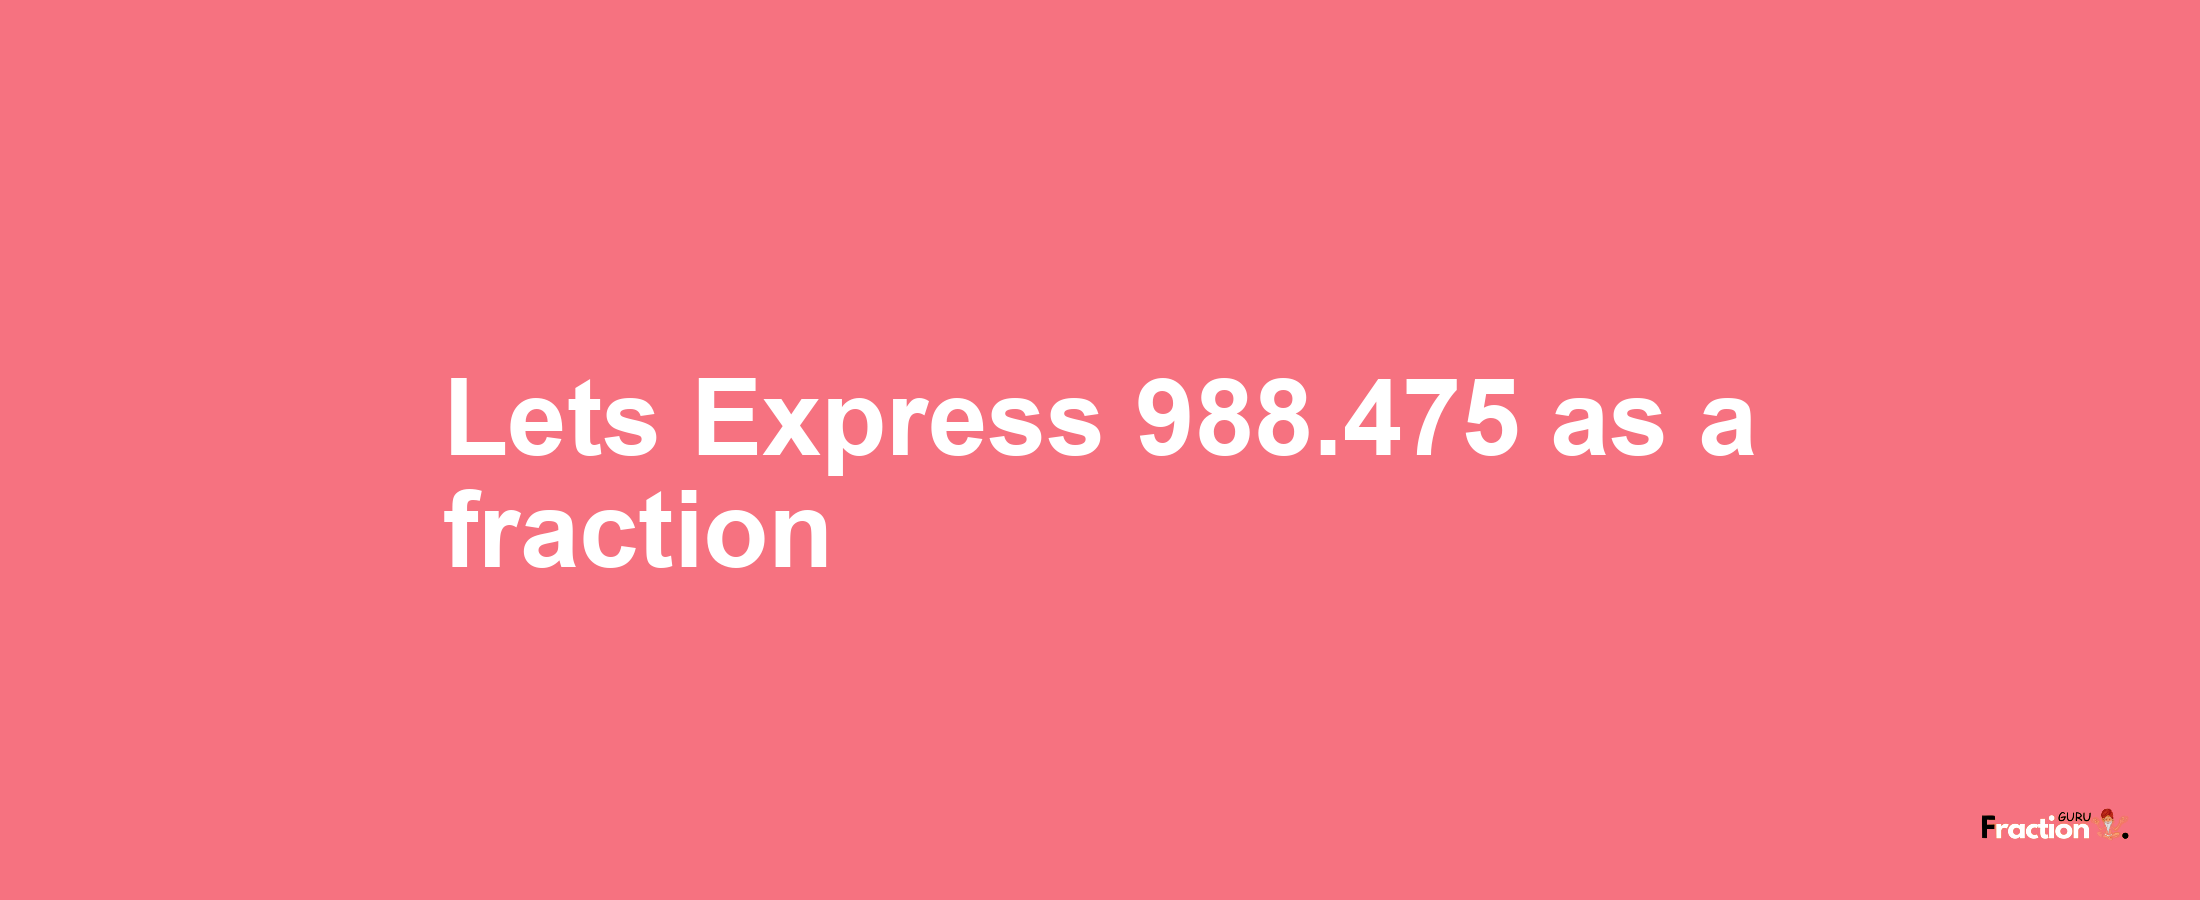 Lets Express 988.475 as afraction